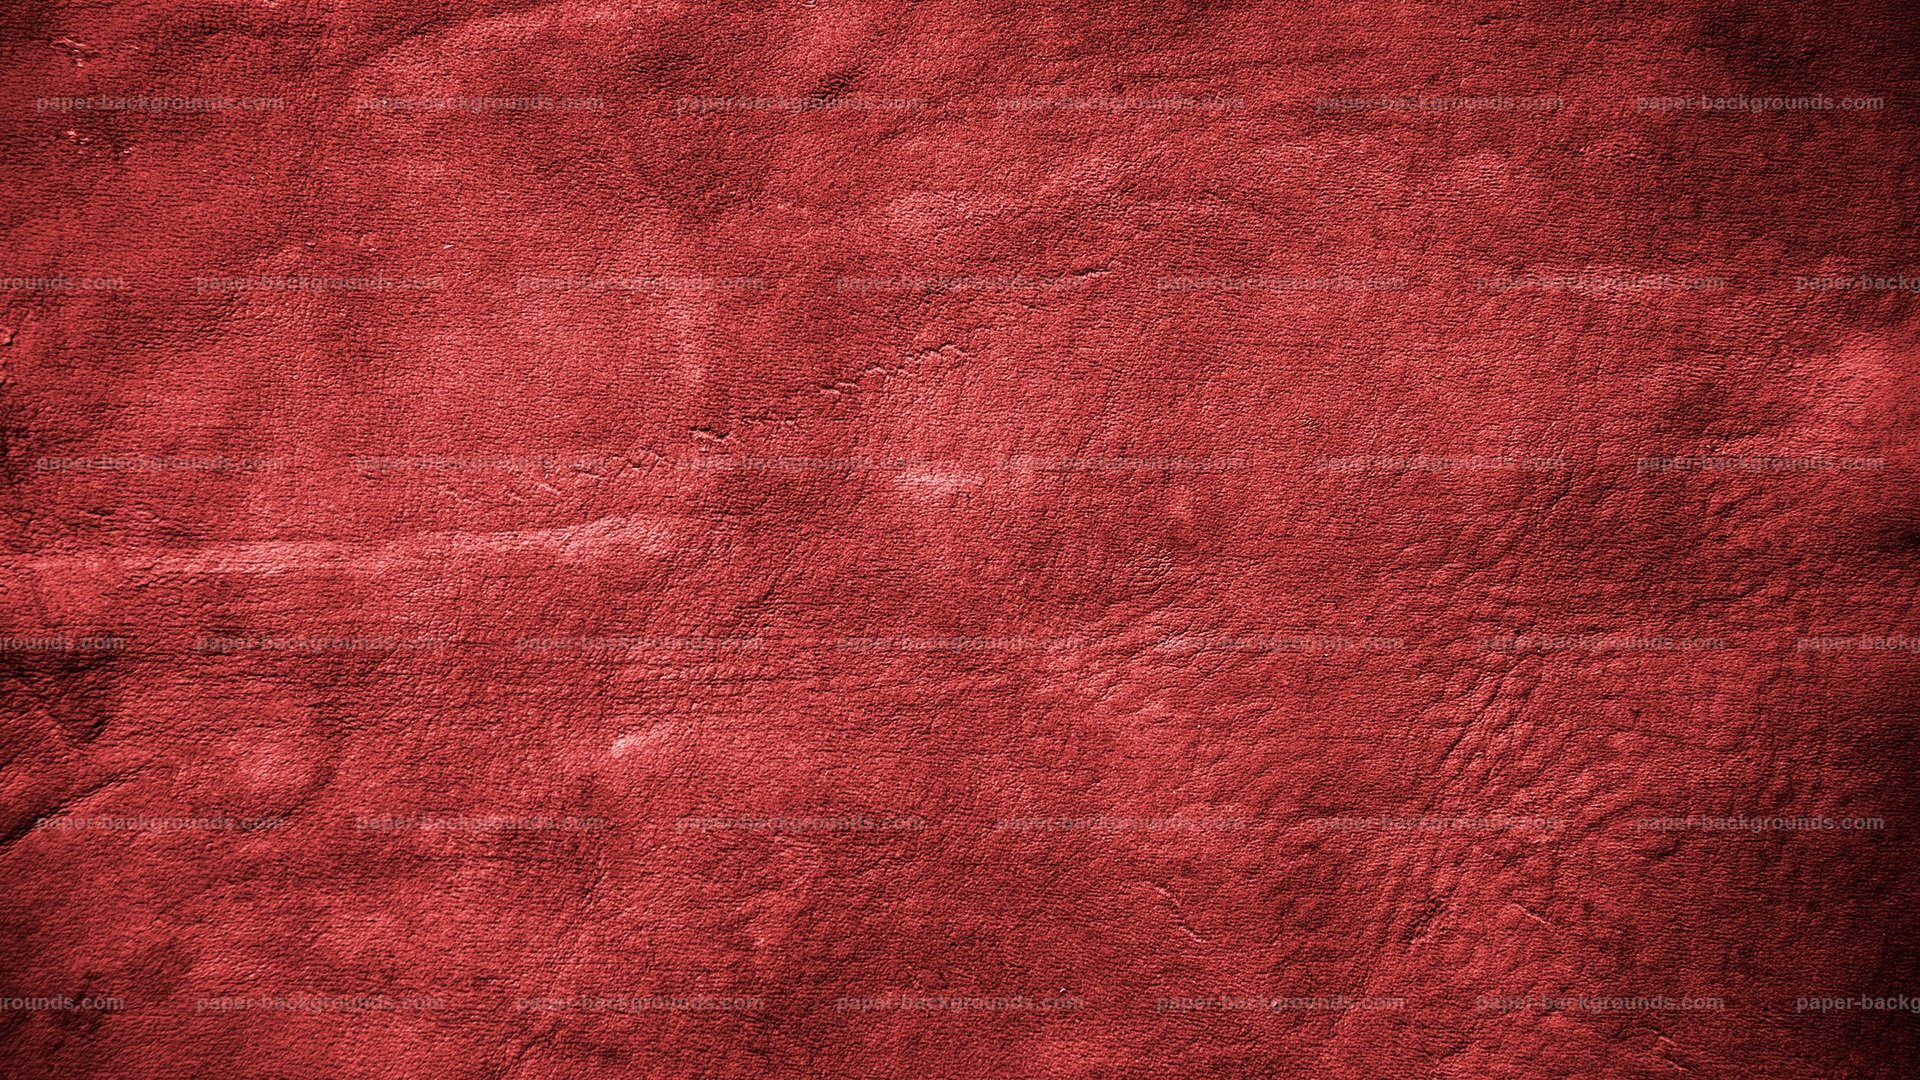 Paper Backgrounds Vintage Red Soft Leather Texture Background